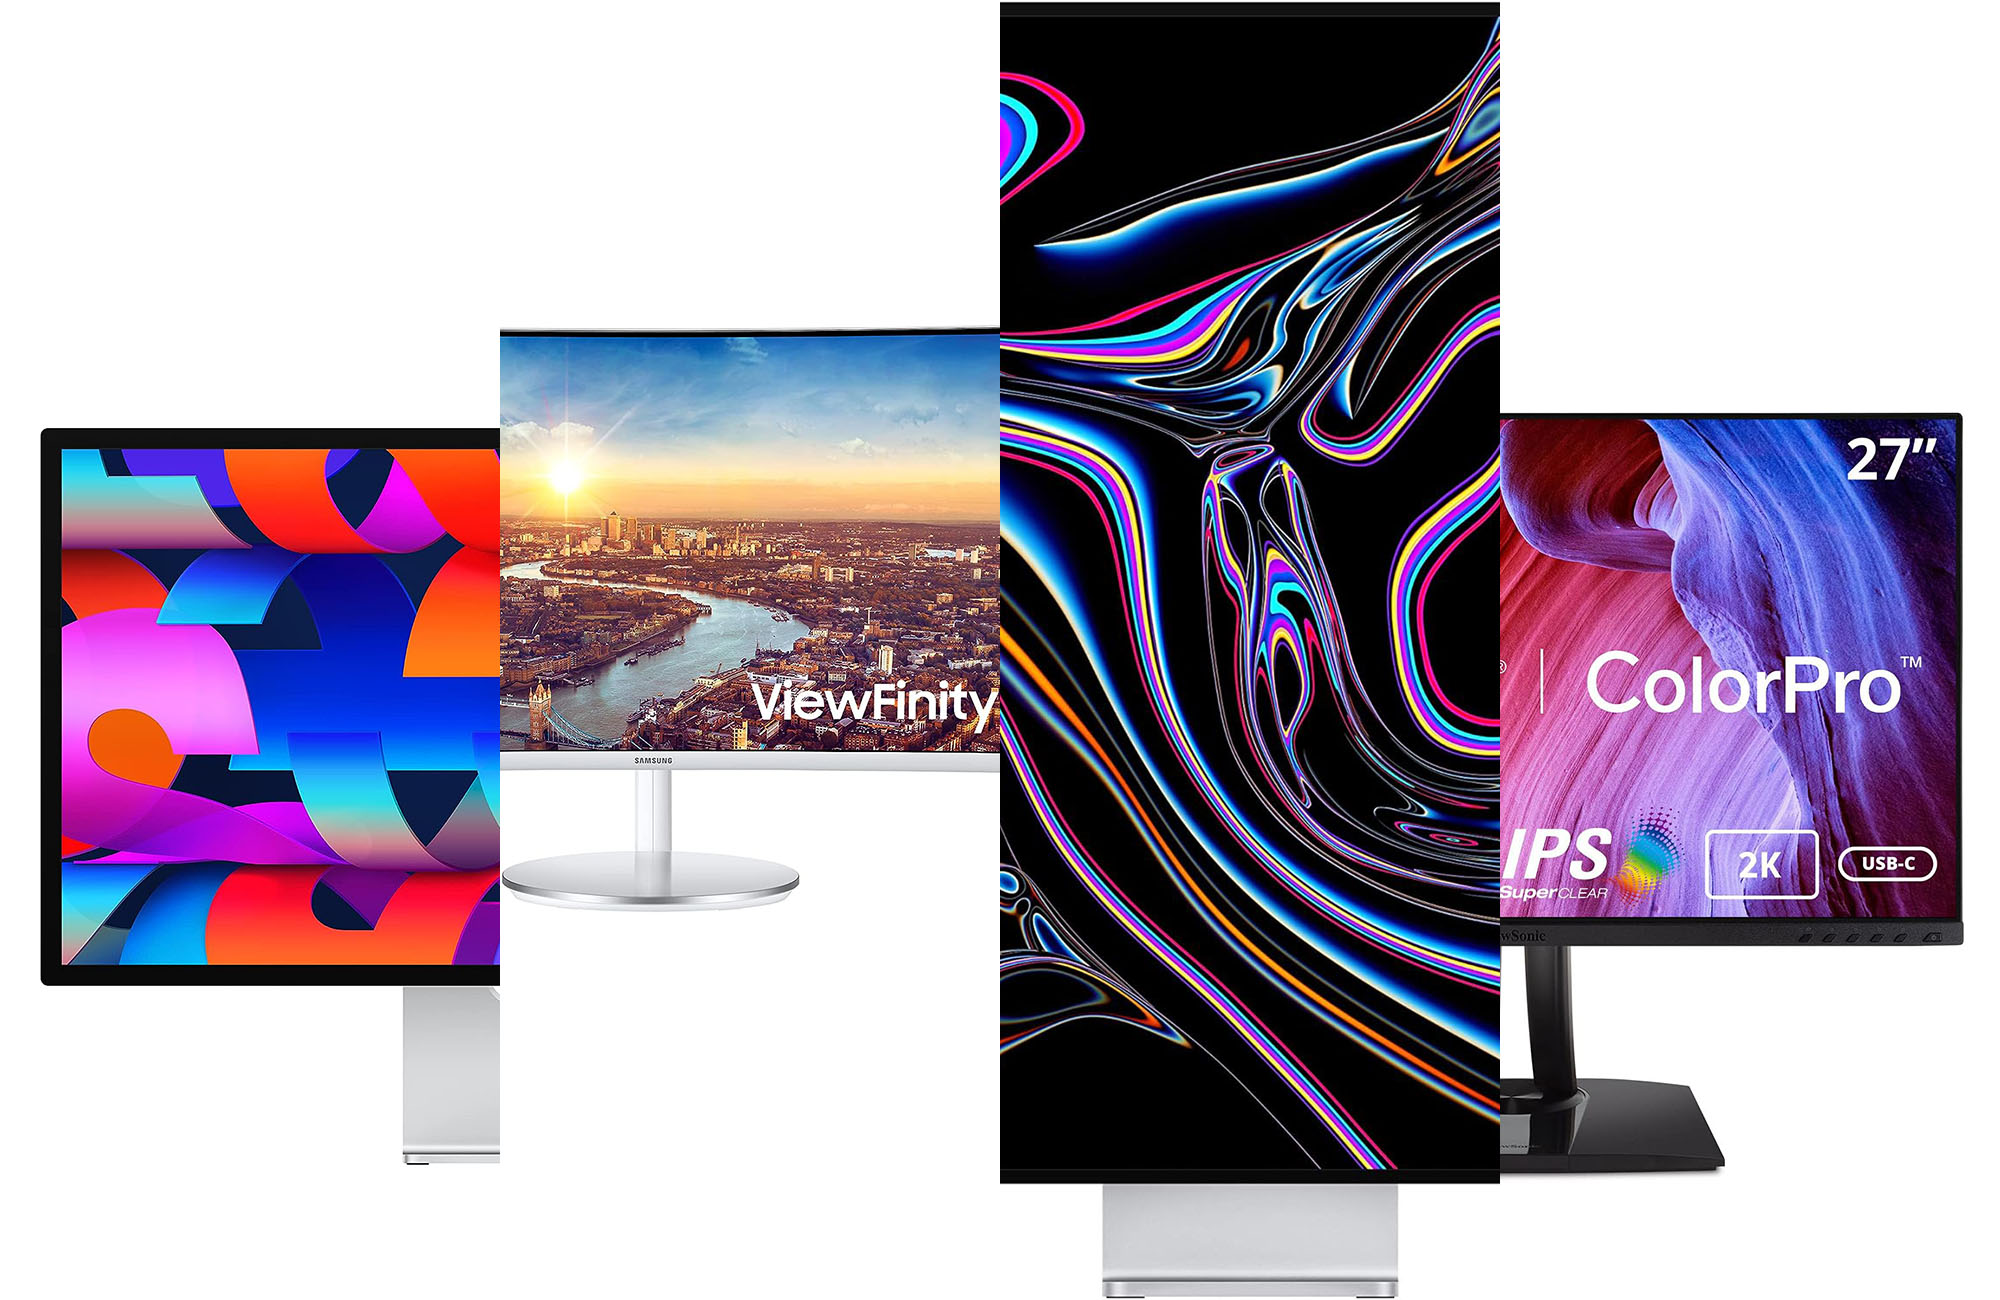 Most MacBook Pros support multiple external displays